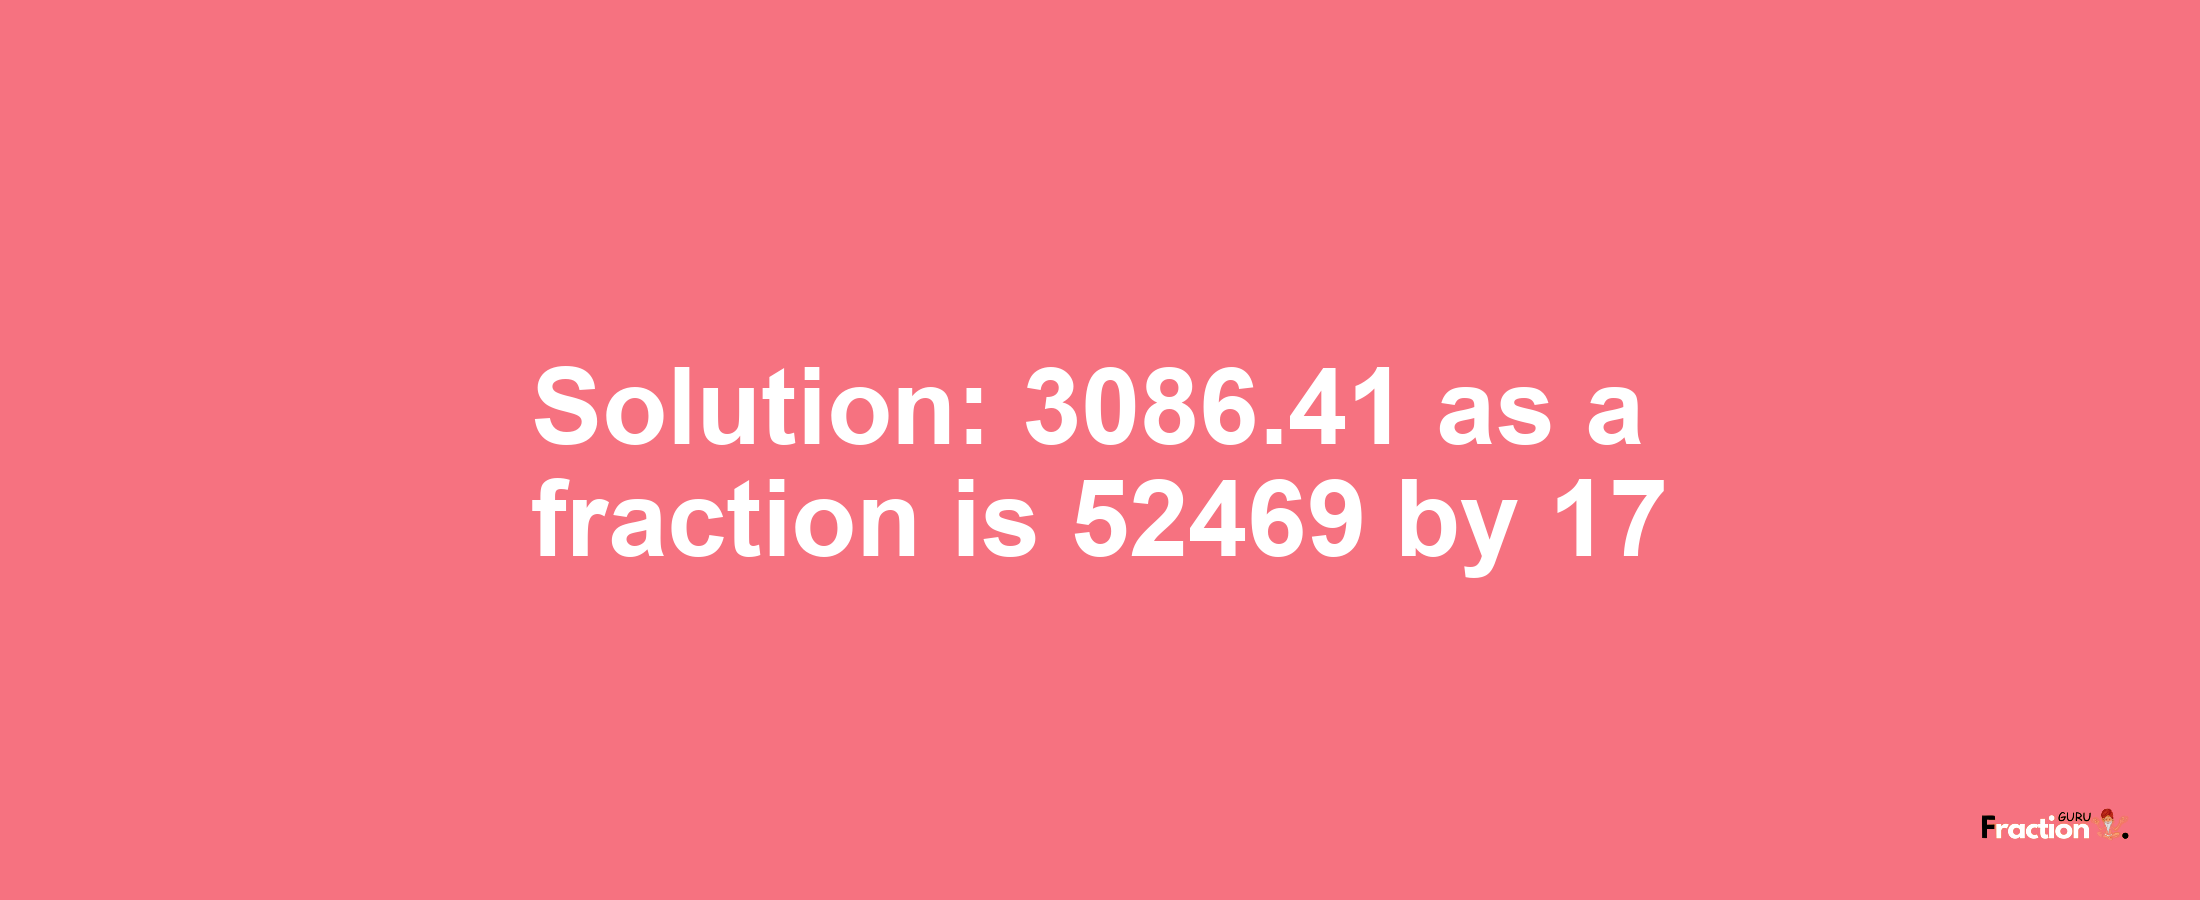 Solution:3086.41 as a fraction is 52469/17